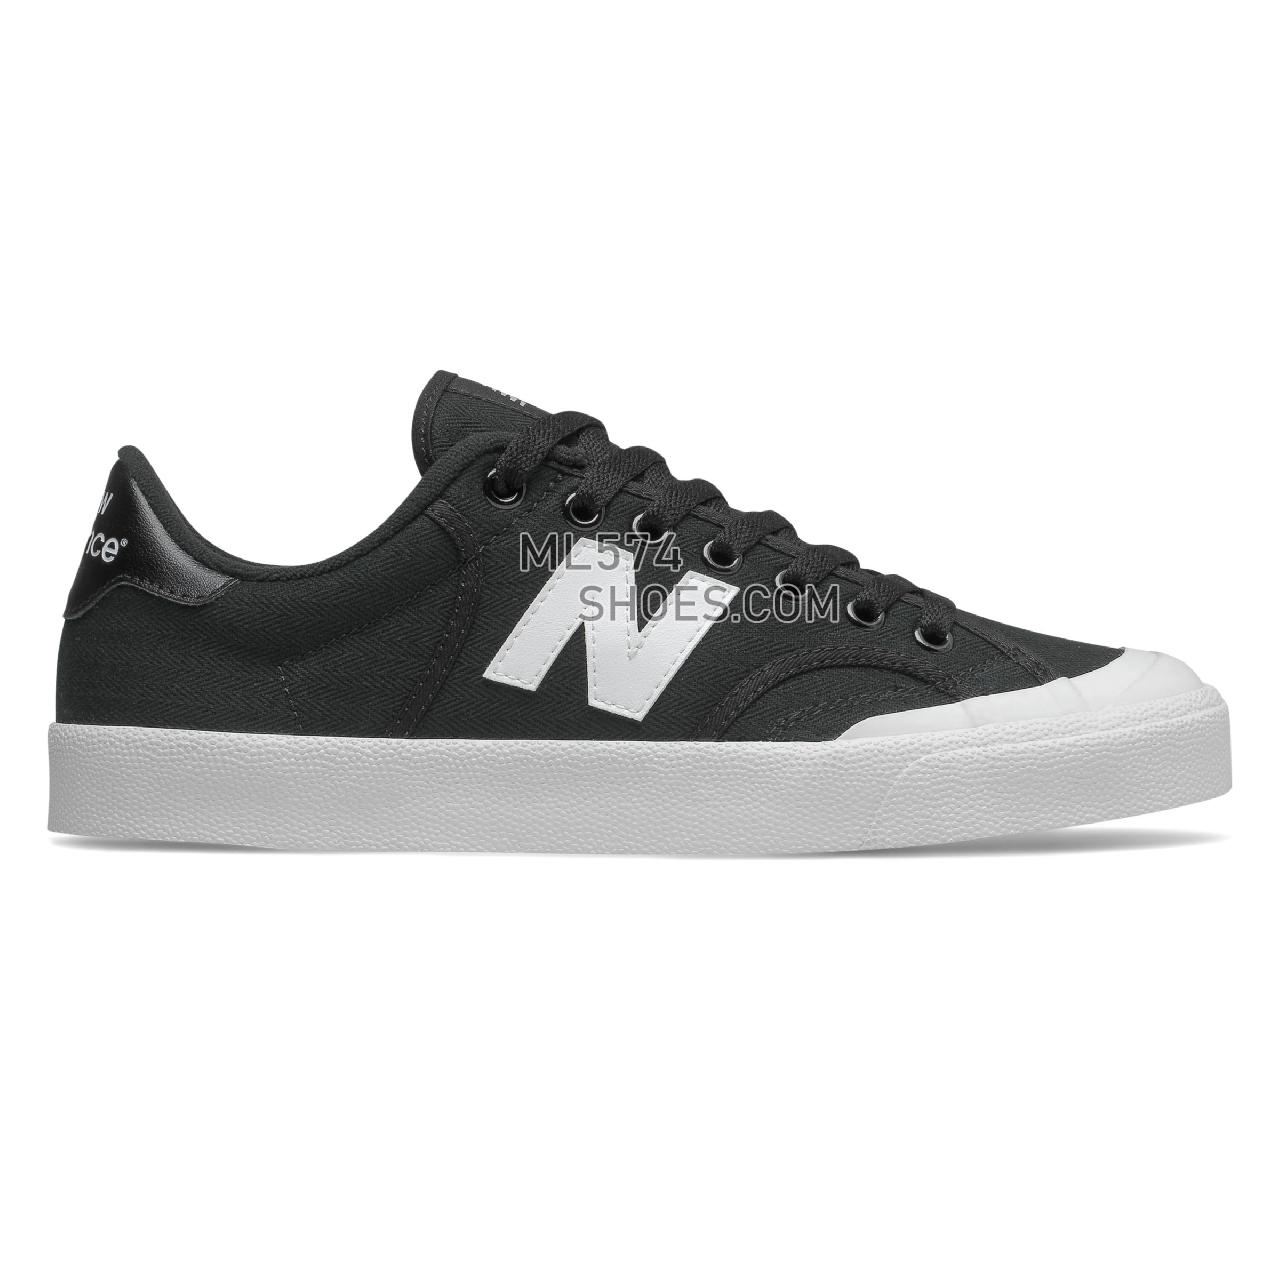 New Balance Pro Court - Men's Classic Sneakers - Black with White - PROCTSQC